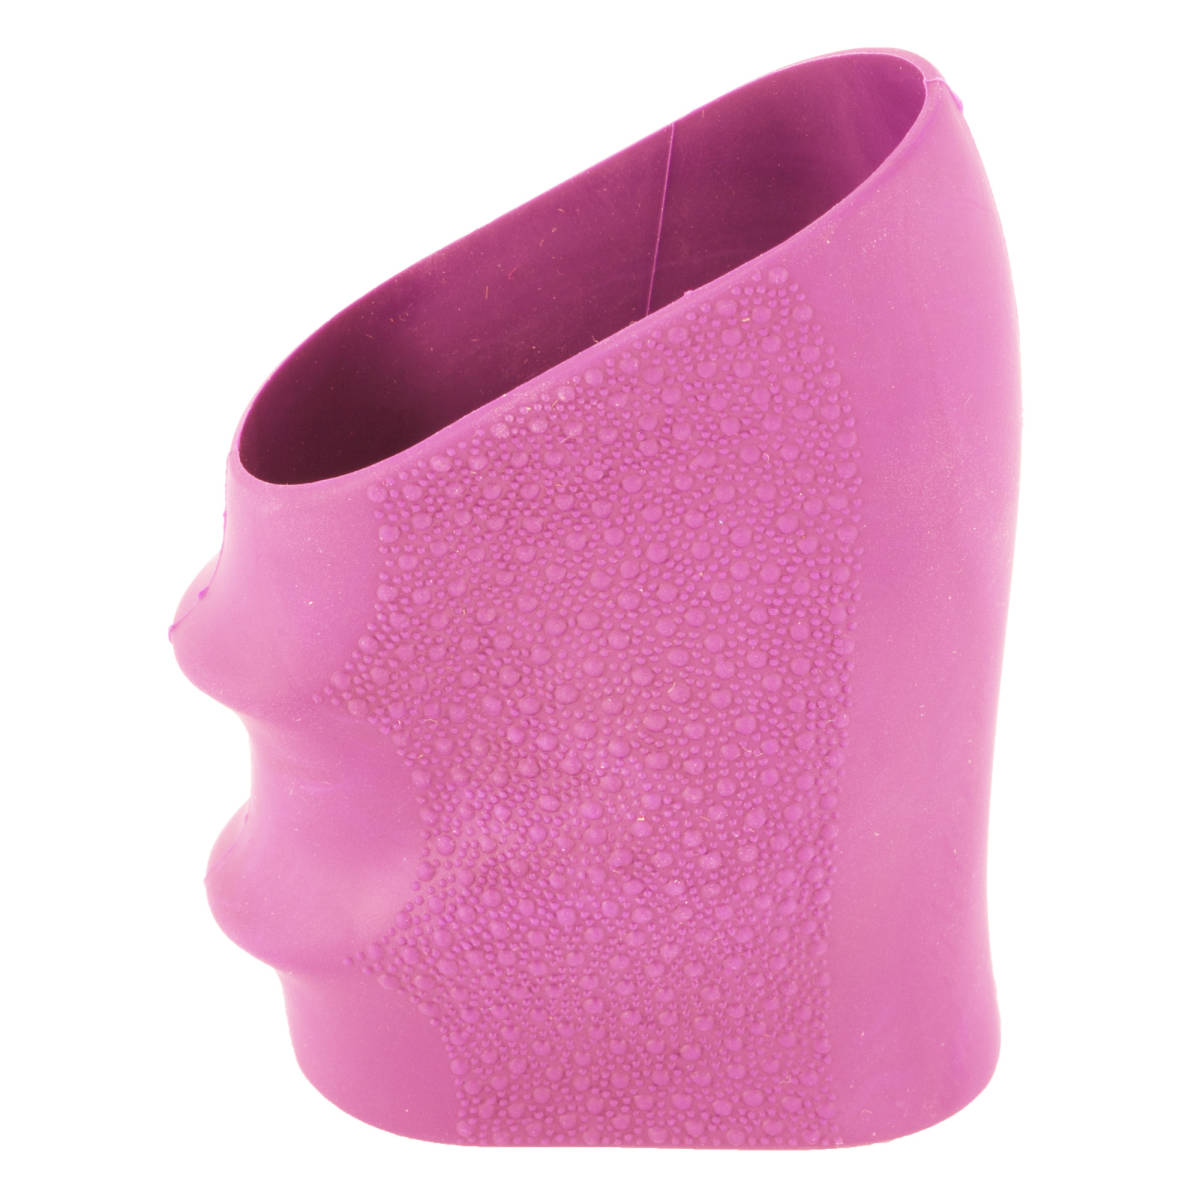 Hogue 17007 HandAll Universal Full Size Grip Sleeve Textured Pink Rubber-img-1